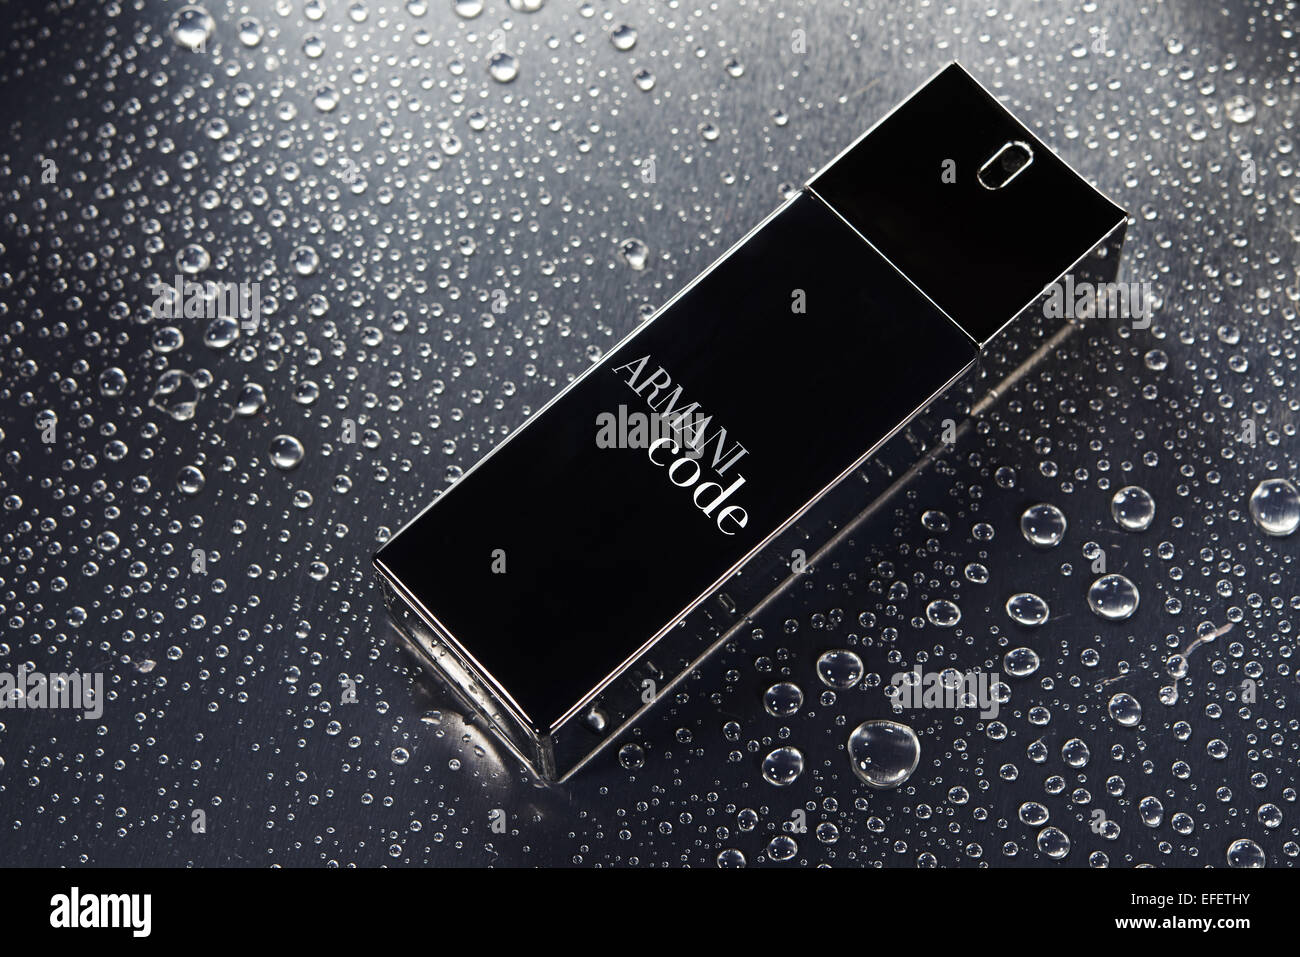 Armani Code black bottle sitting on water droplets Stock Photo